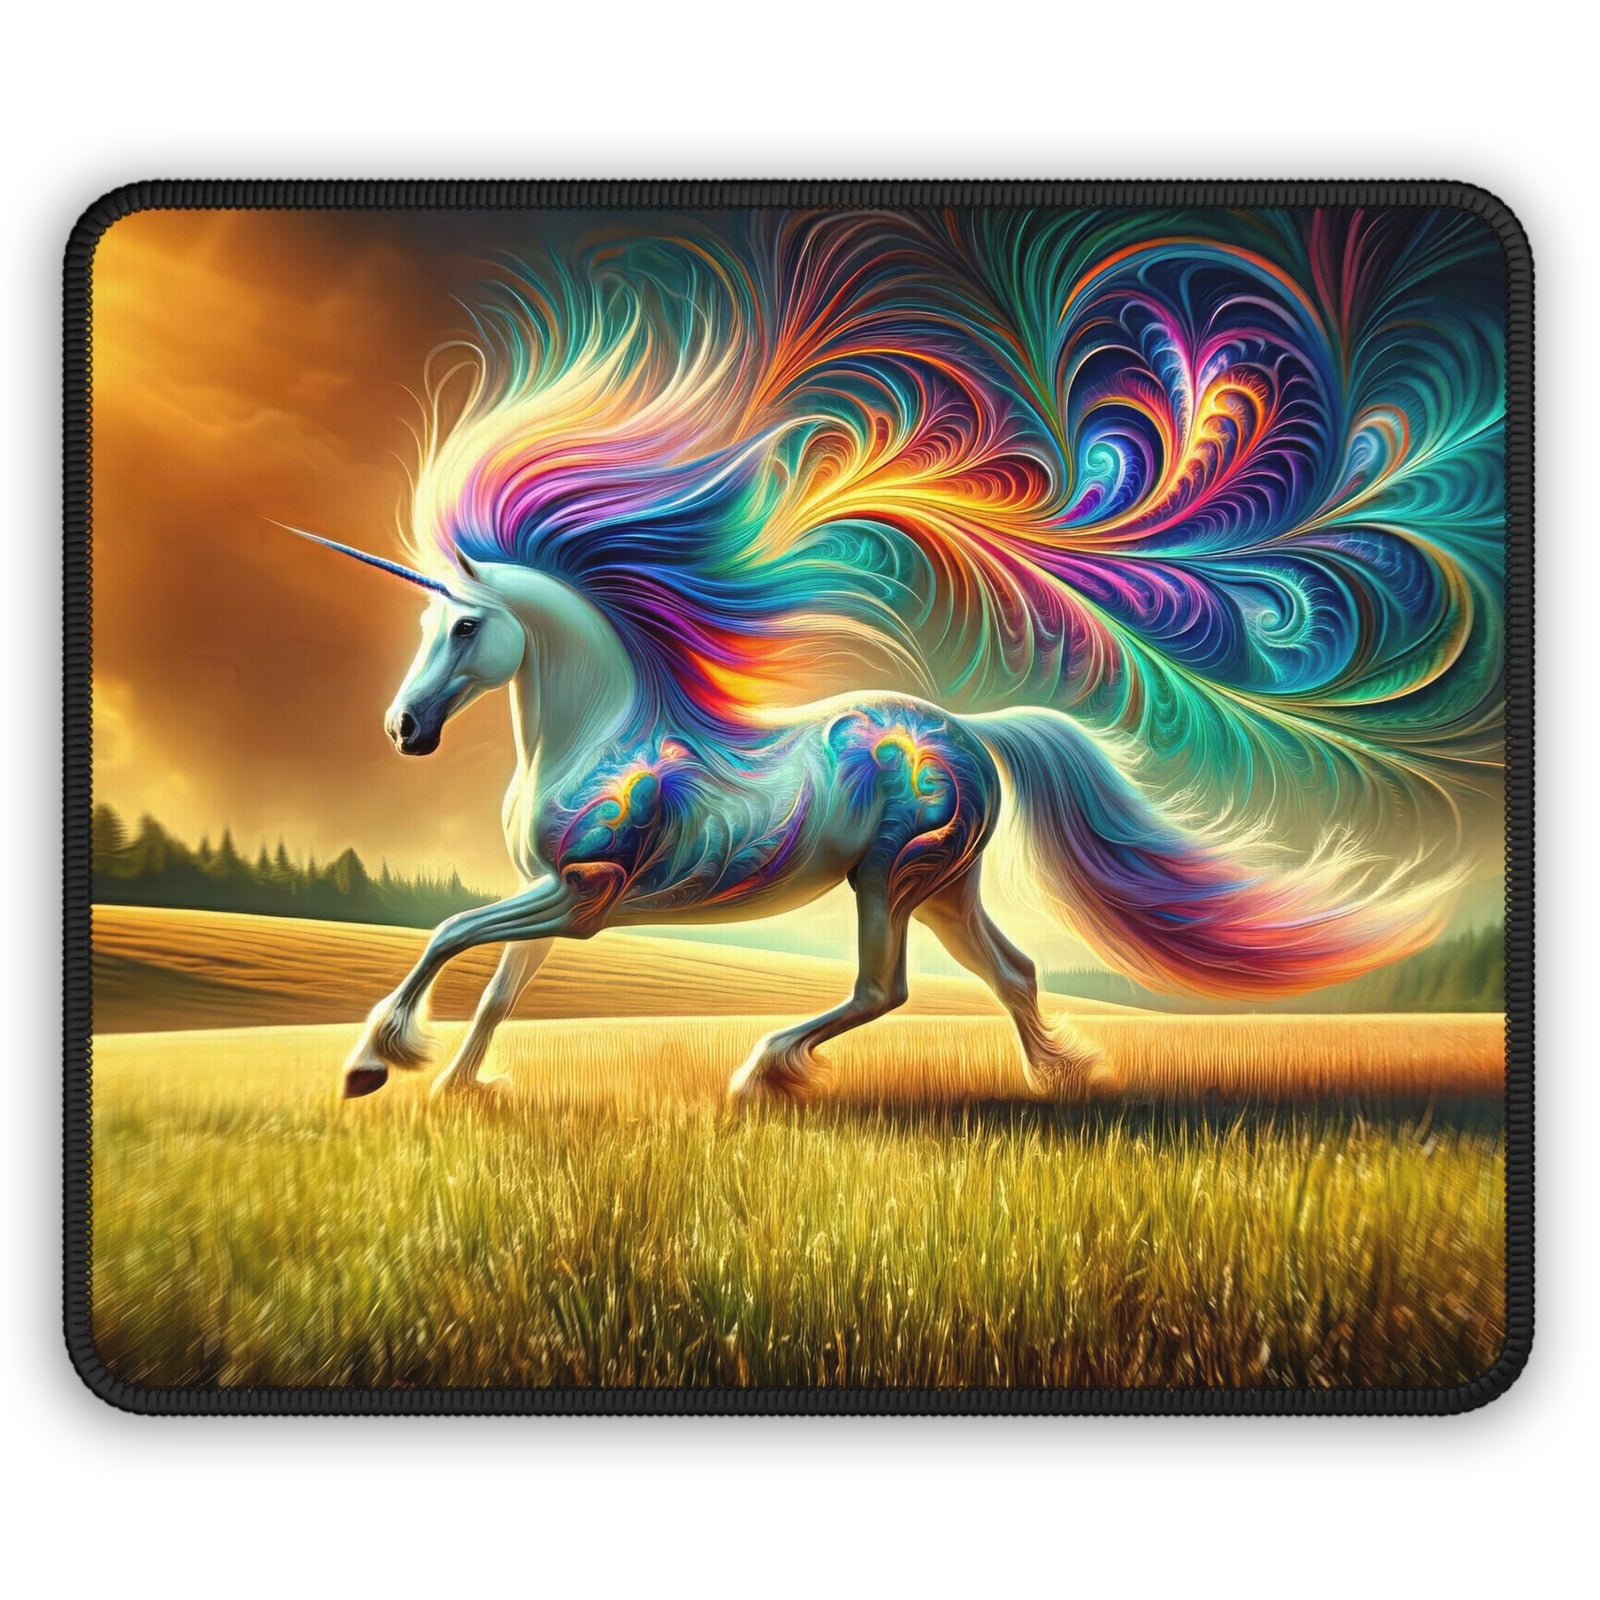 The Prism-Maned Mystique Gaming Mouse Pad